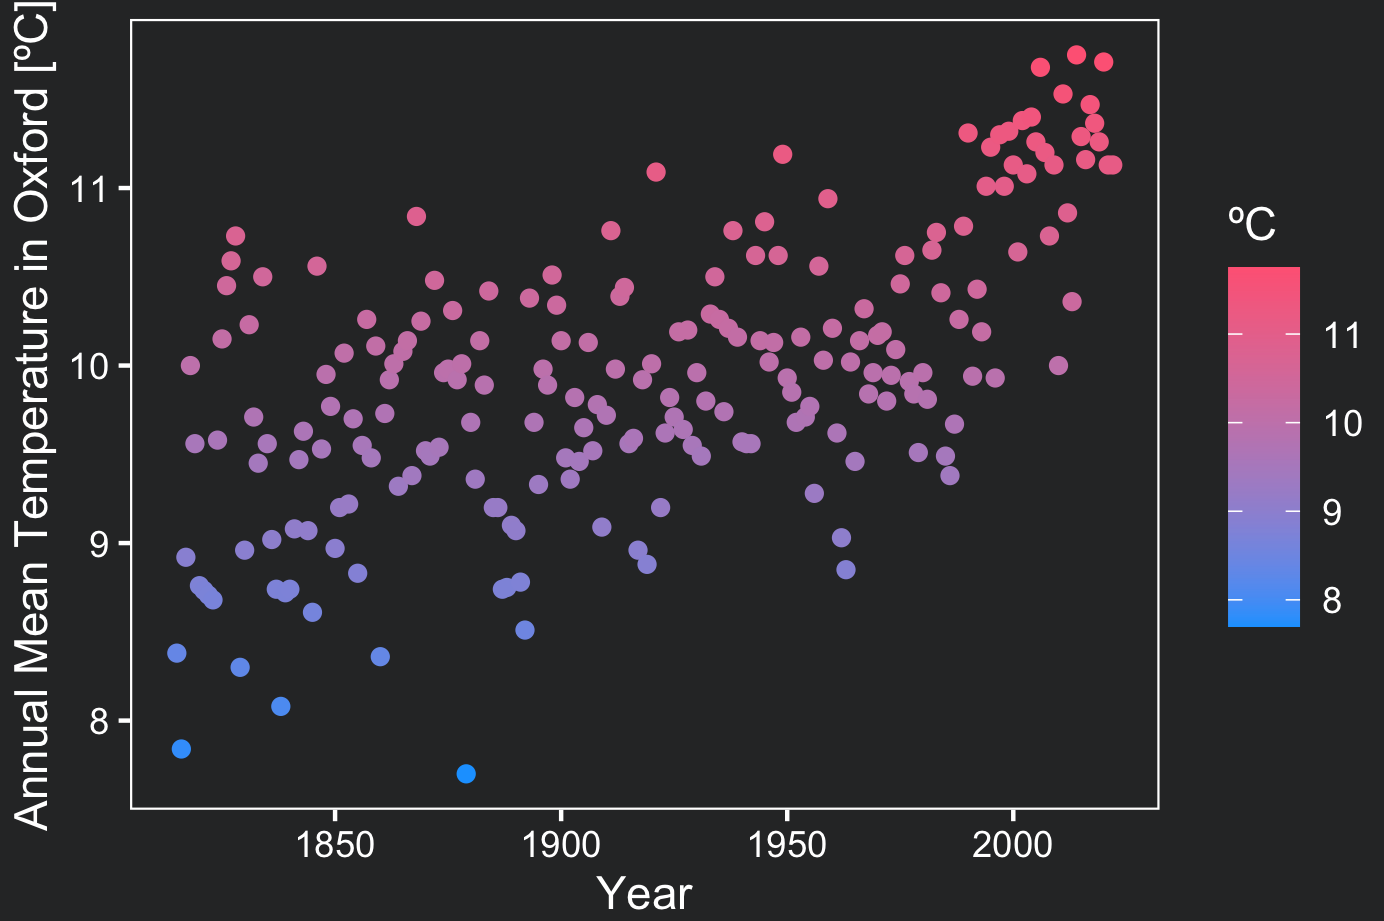 ggplot2 climate visualization with customized theme 